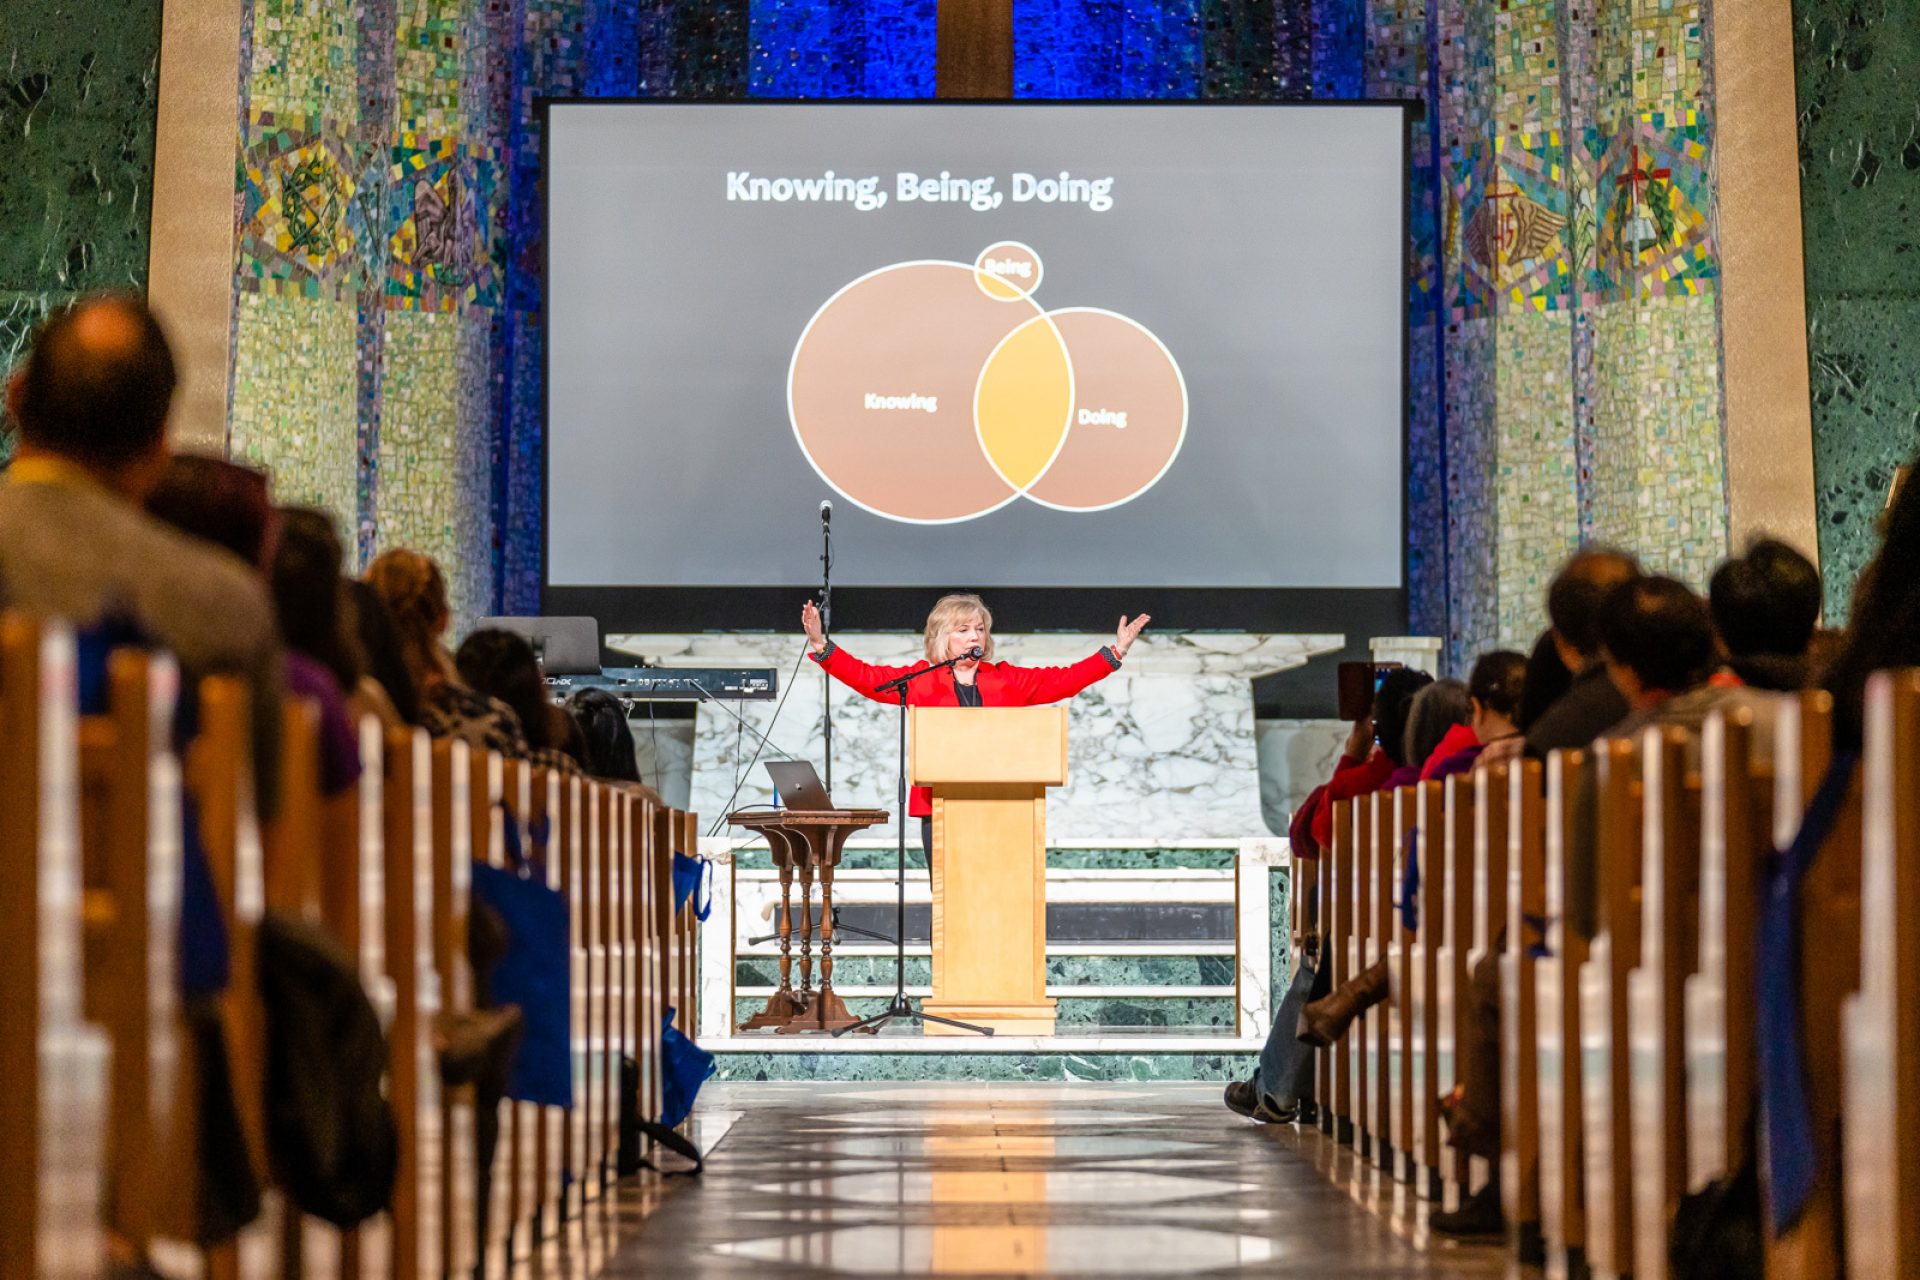 A woman lifts her hands up at a pulpit. The screen behind her displays a Venn diagram.